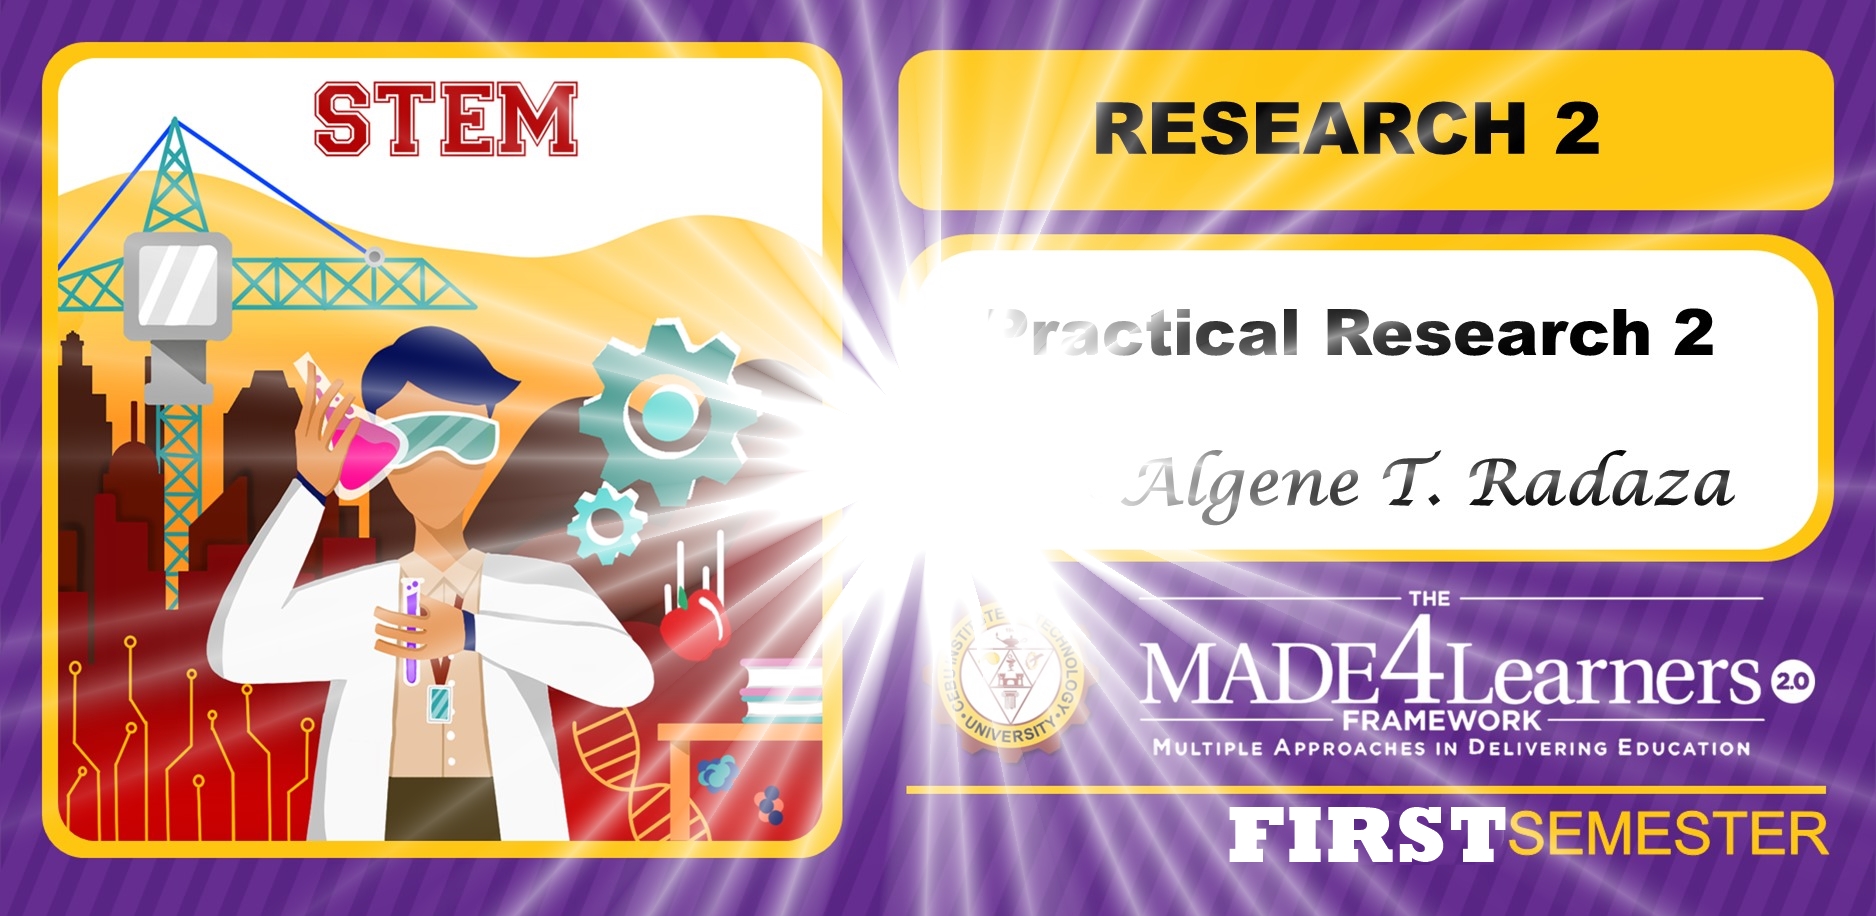 RES2: Practical Research 2 - Radaza